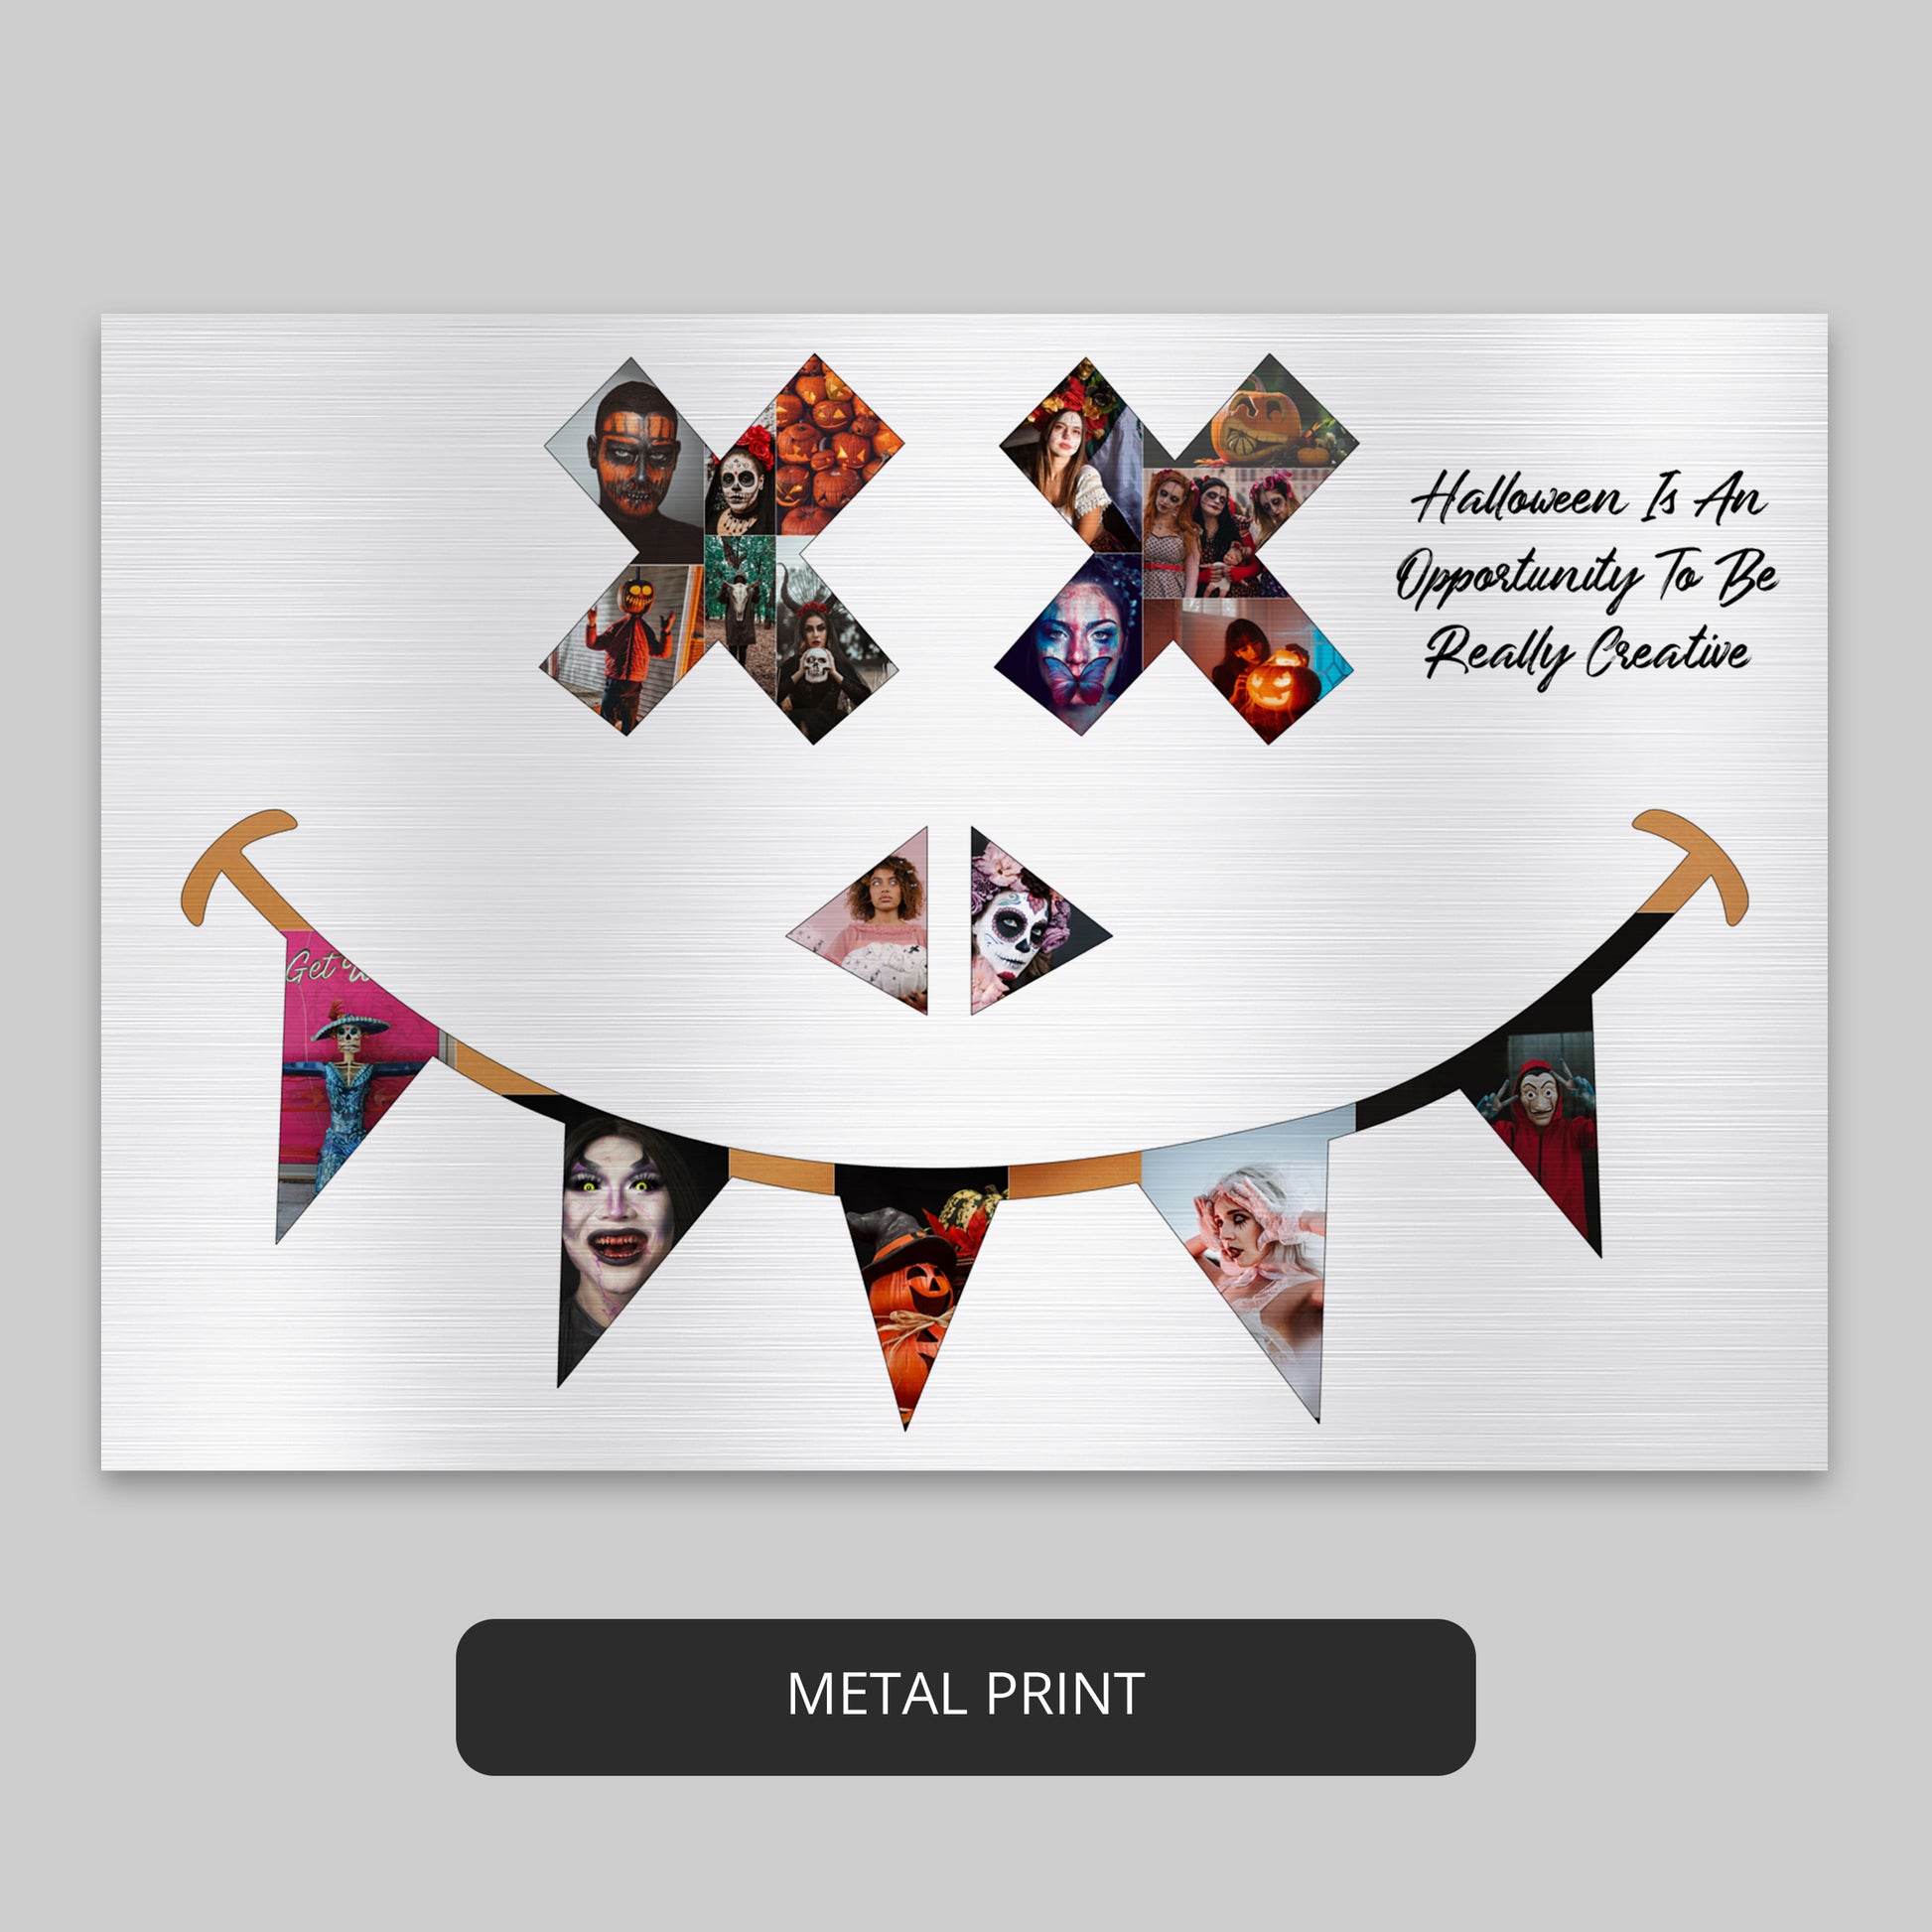 Halloween Birthday Gifts: Customizable Personalized Photo Collage